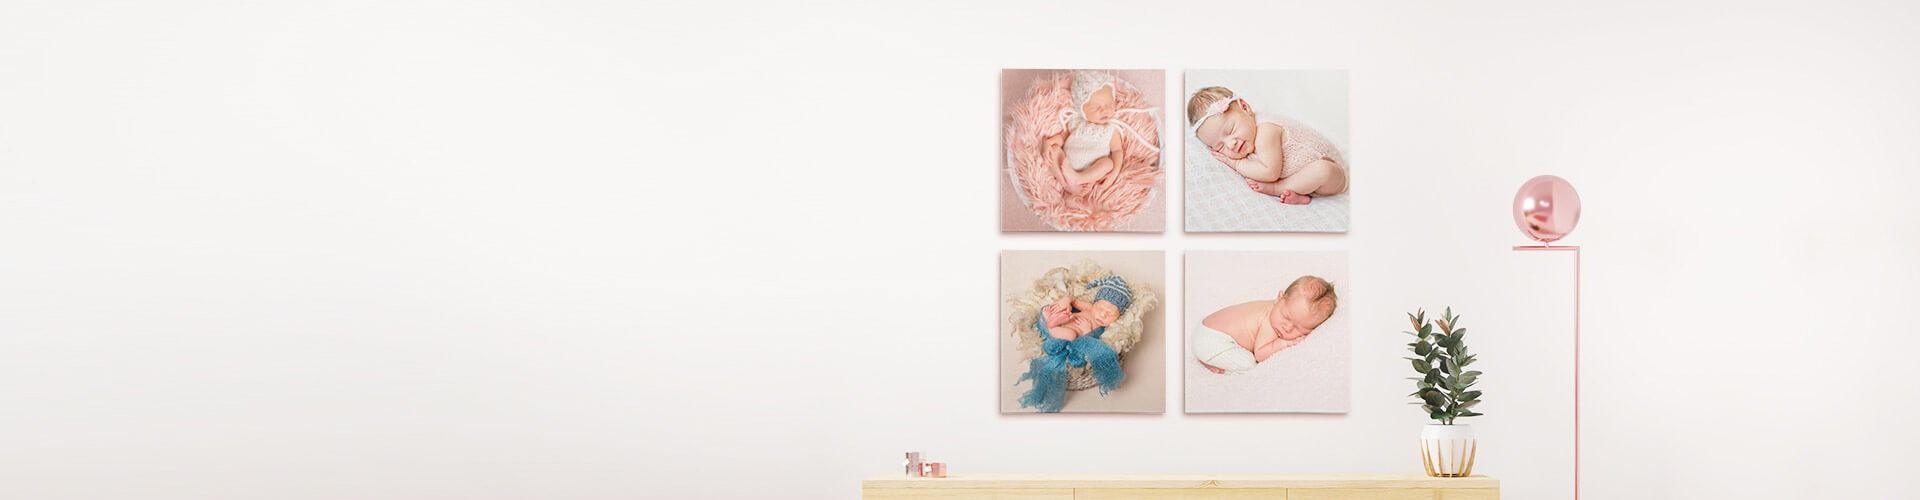 Canvaschamp Brings Easy To Order Canvas Prints To Decorate Your Home